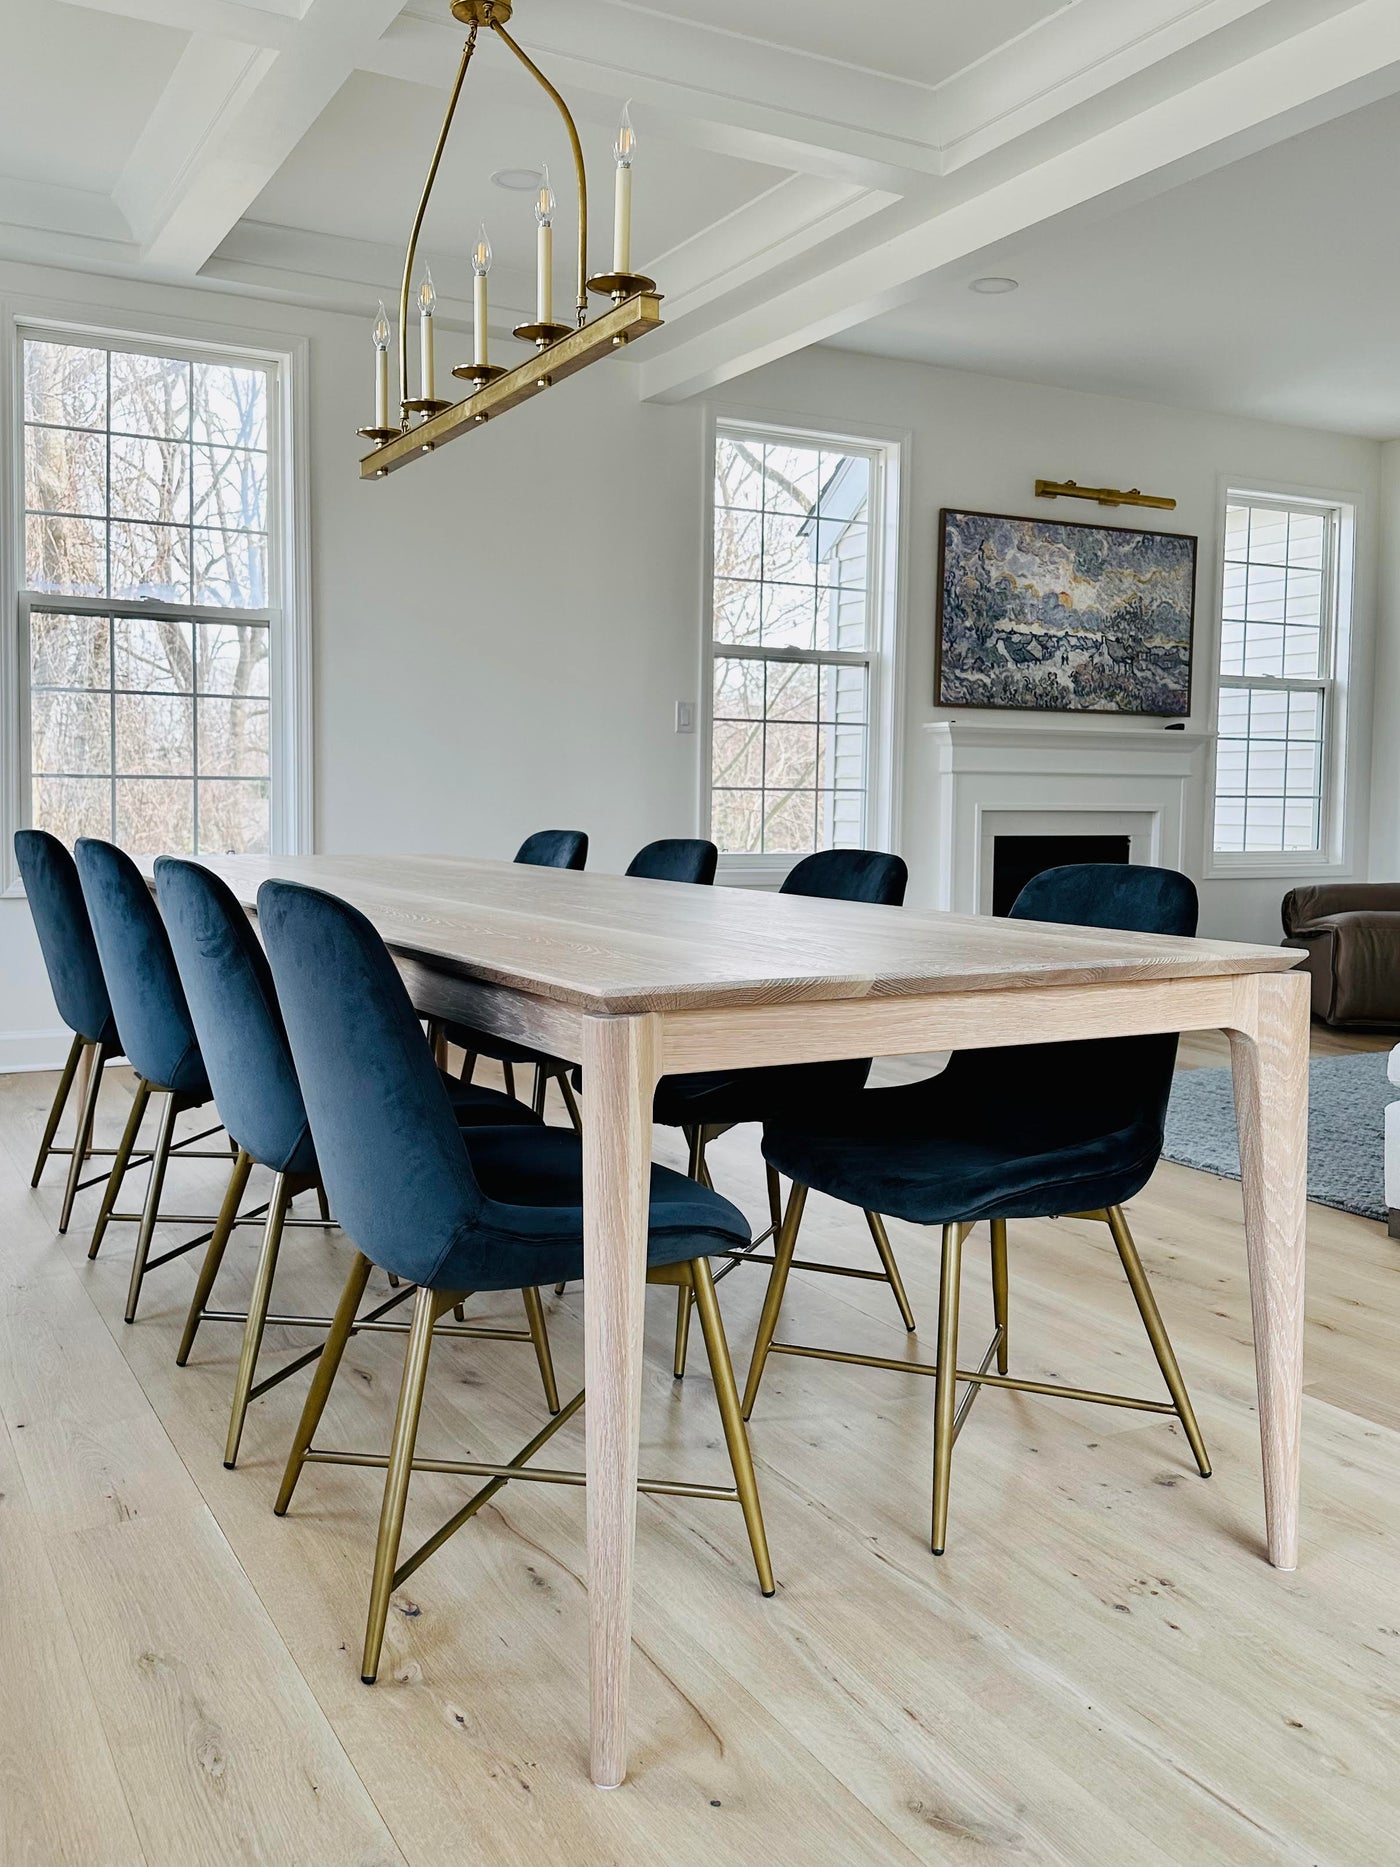 SARI by Relic Table Co. Relic Tables handmade white oak dining table with 8 chairs modern contemporary design interior design modern dining room by interior designer